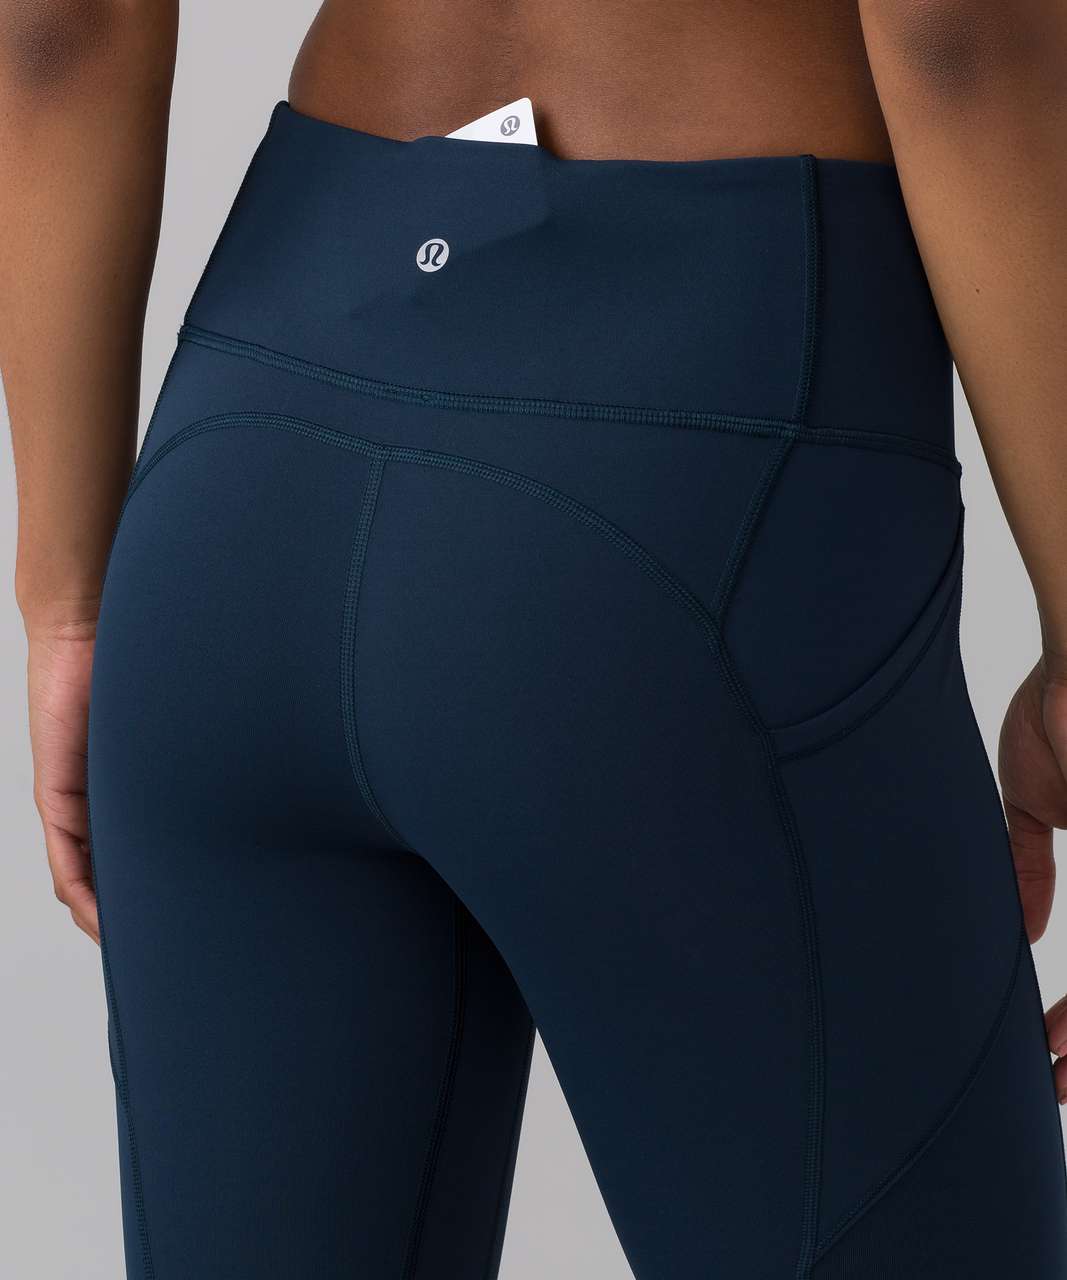 Lululemon All The Right Places Crop II *23" - Jaded